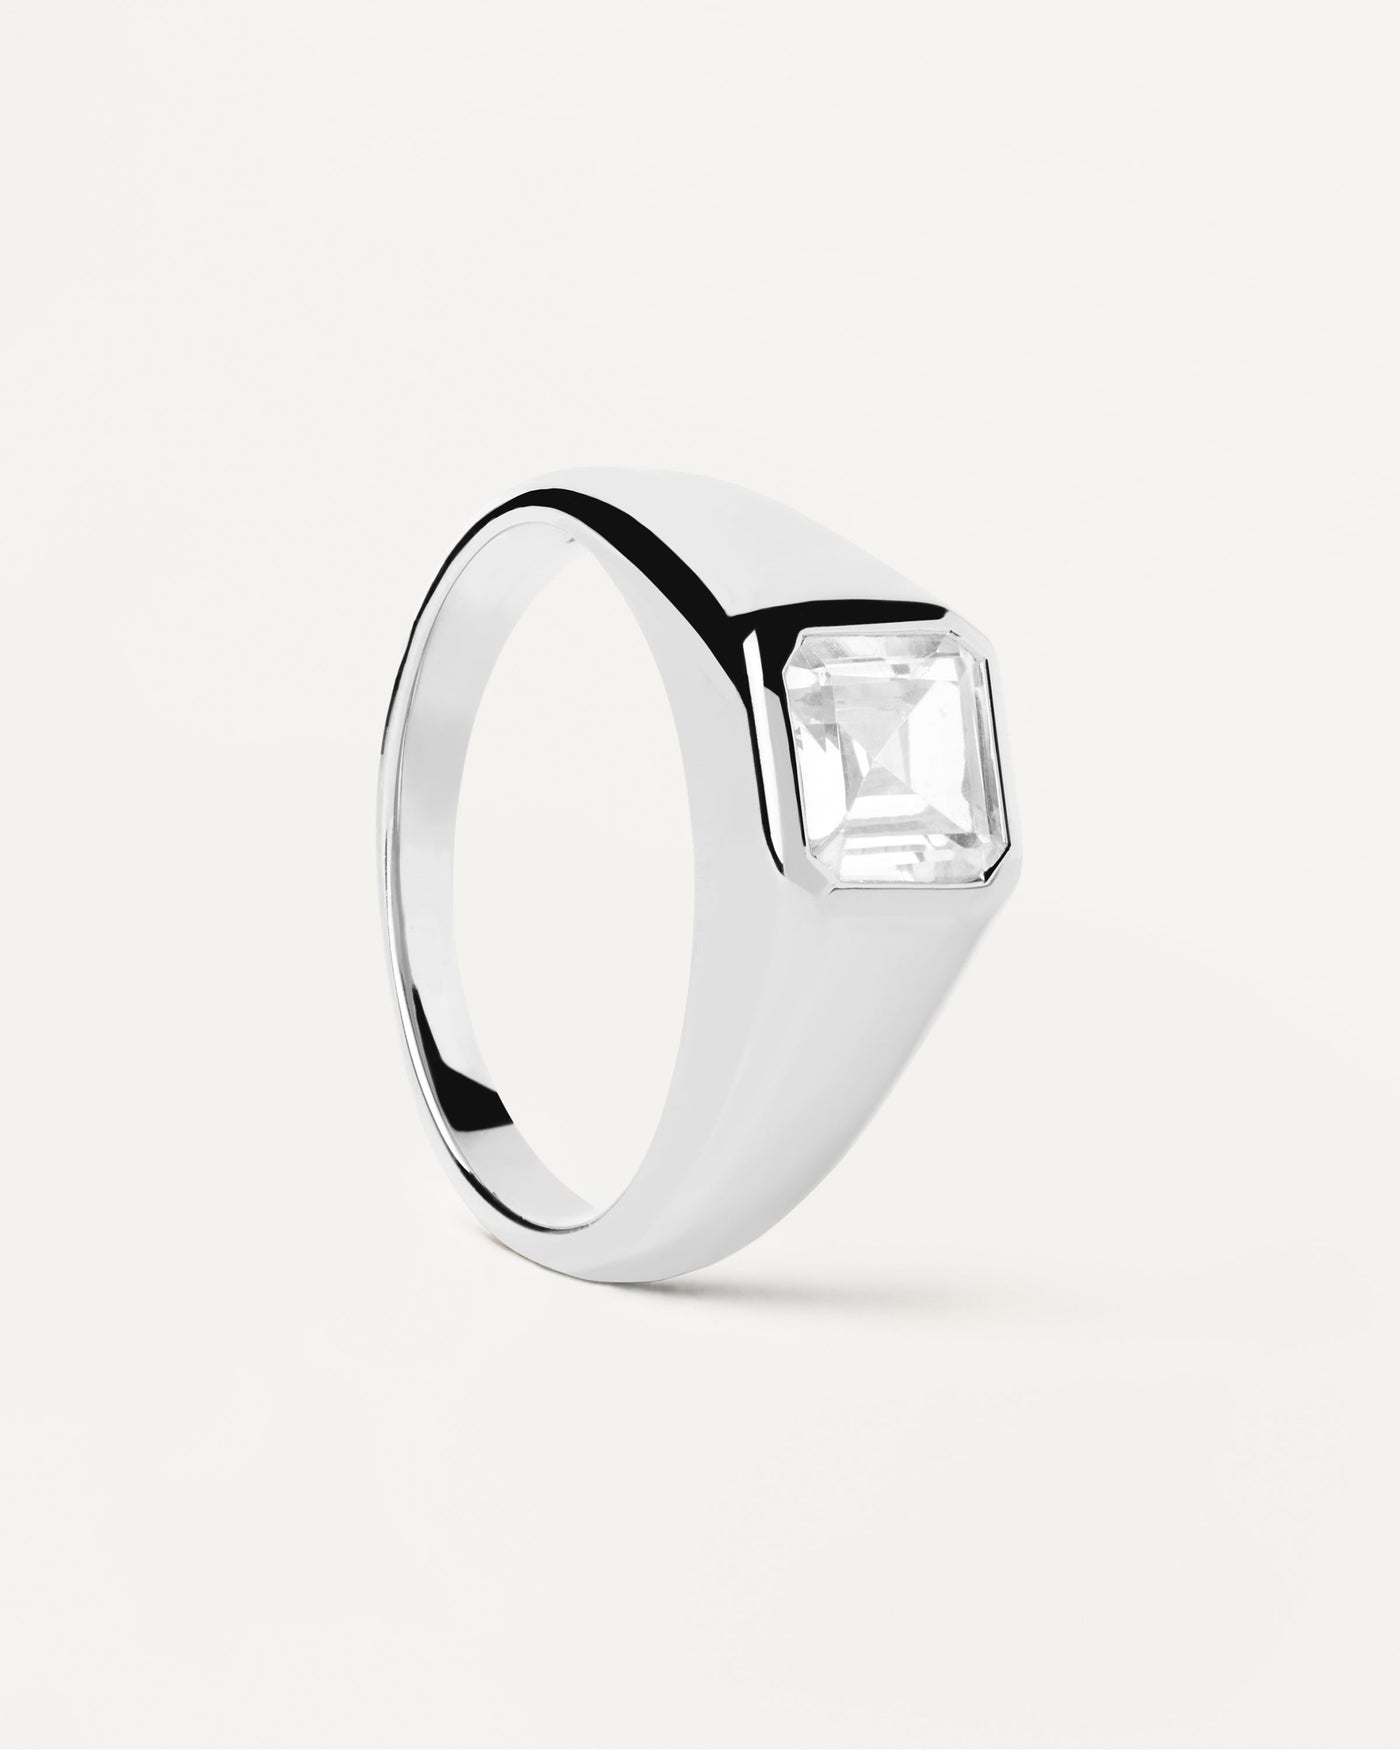 2023 Selection | Square Shimmer Stamp Silver Ring. Sterling silver signet ring with squared white zirconia. Get the latest arrival from PDPAOLA. Place your order safely and get this Best Seller. Free Shipping.